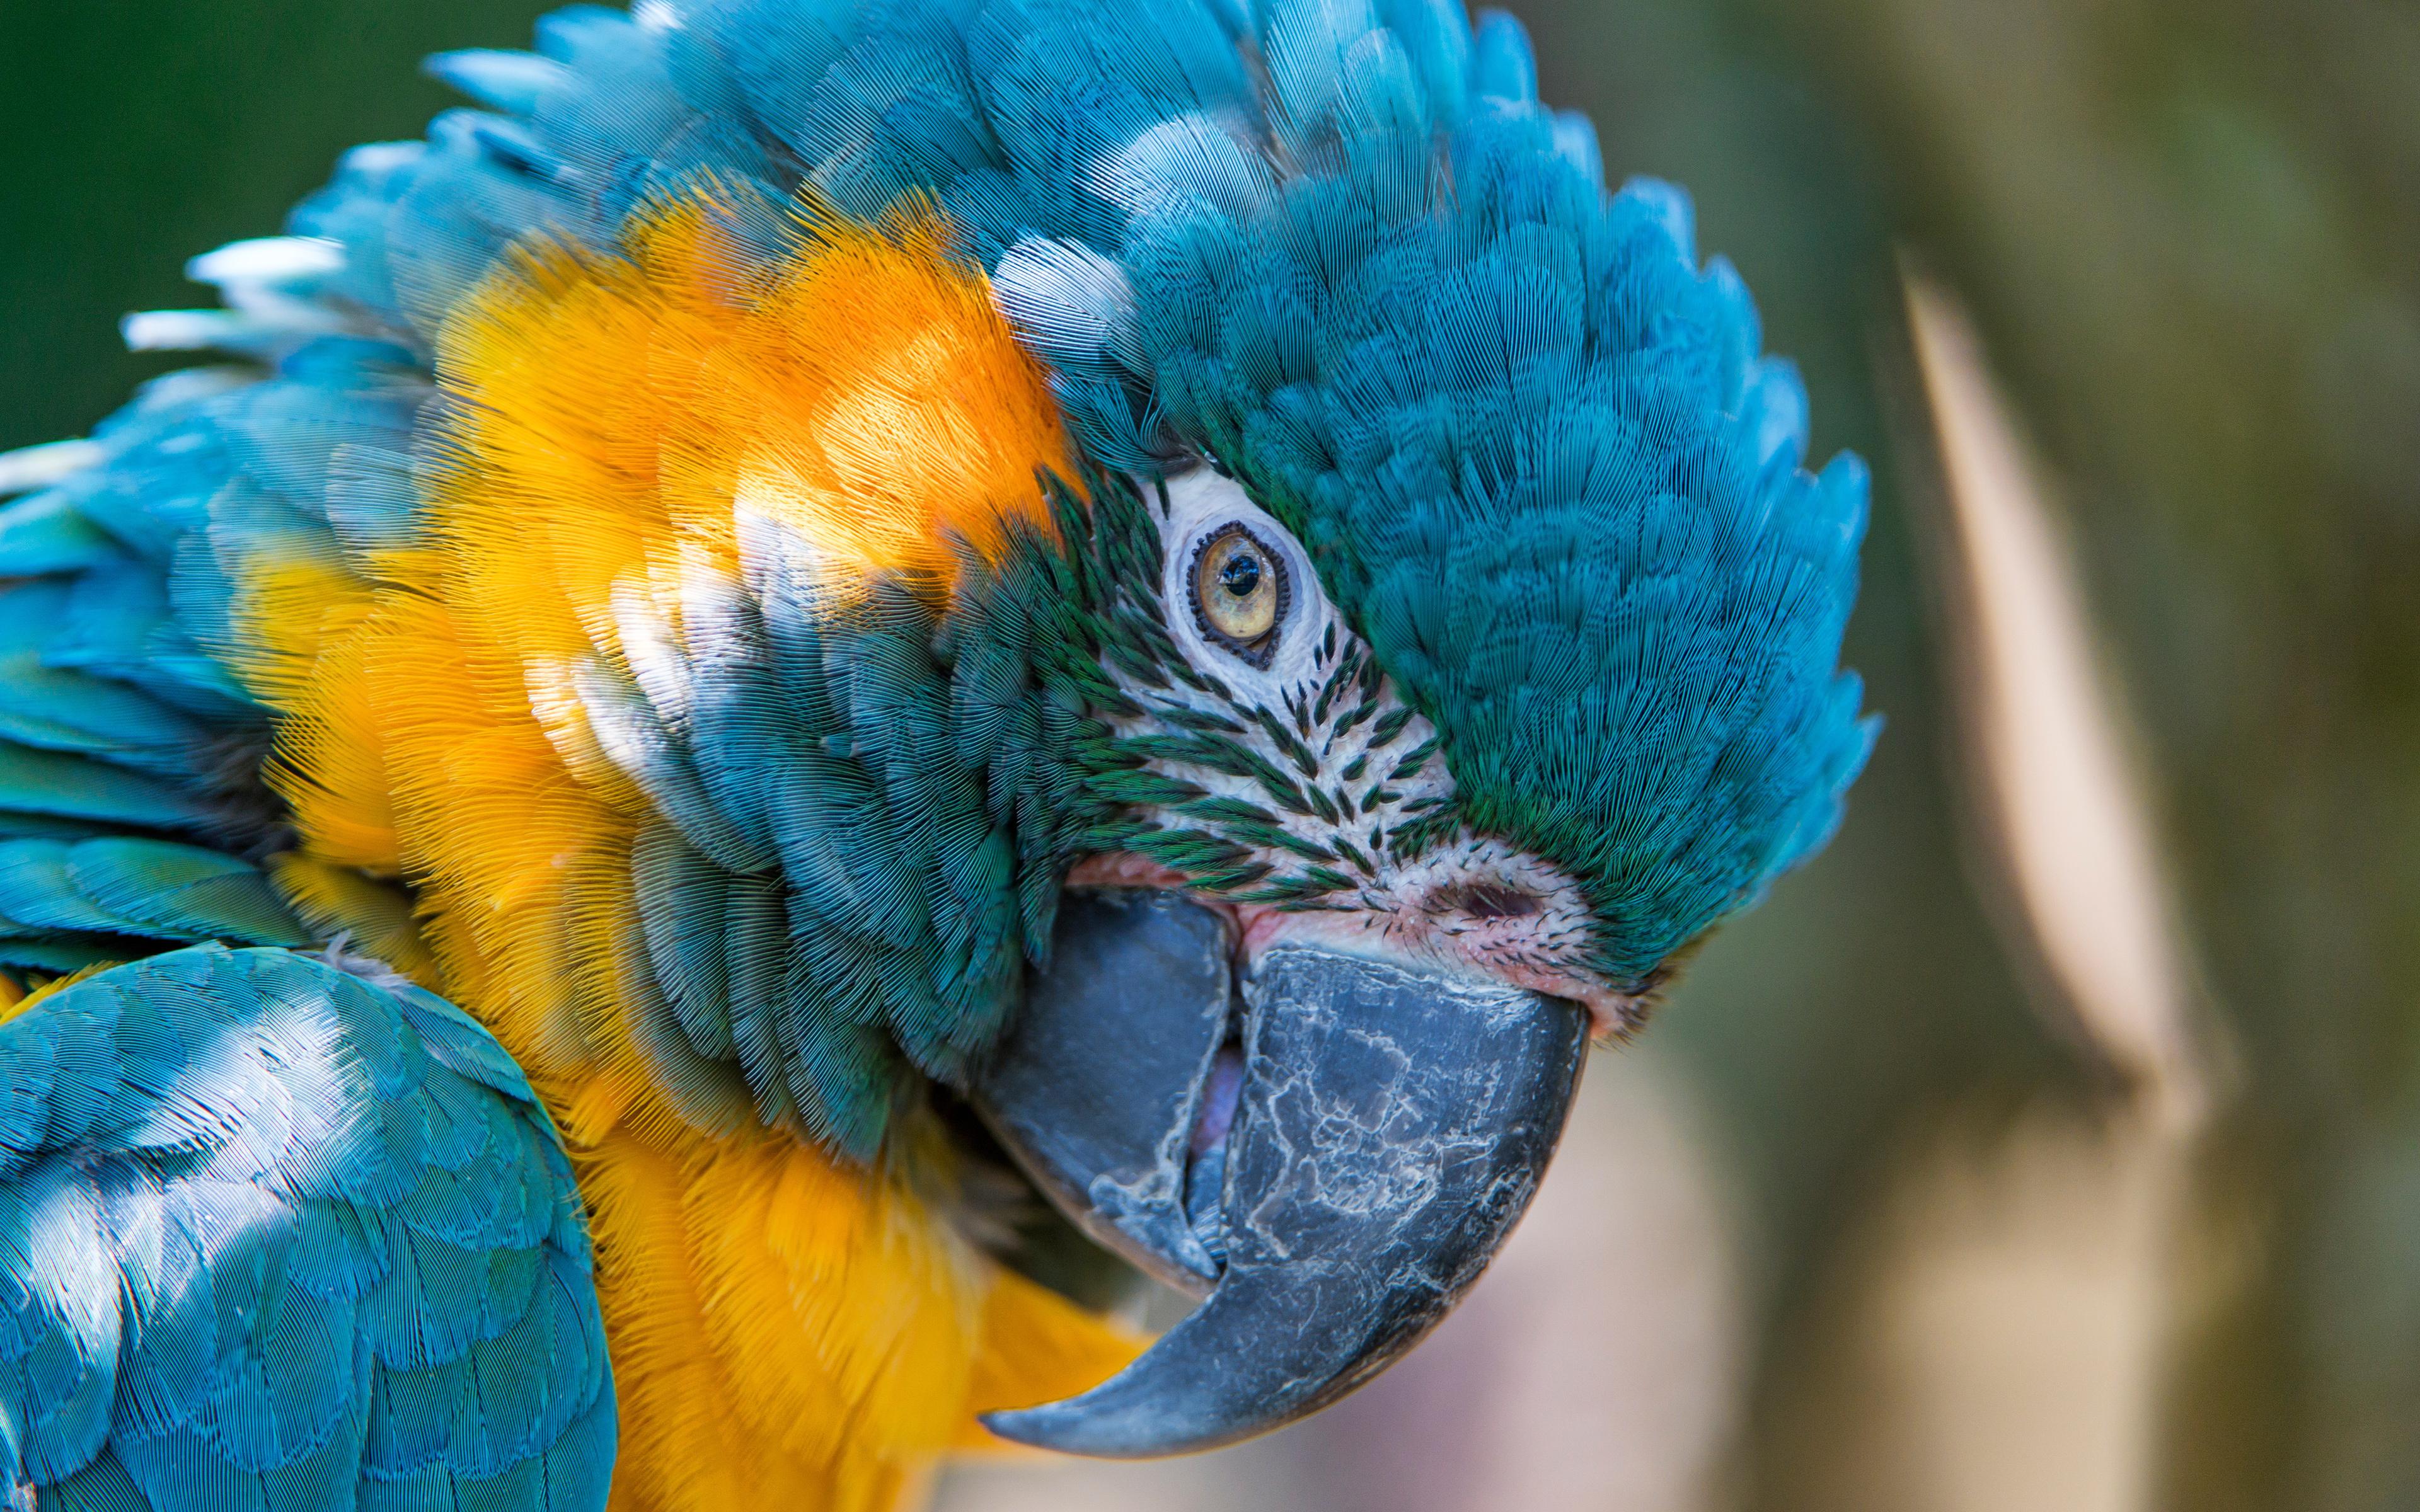 Macaw, Parrot, Colorful Bird, Muzzle, Close Up, Wallpaper